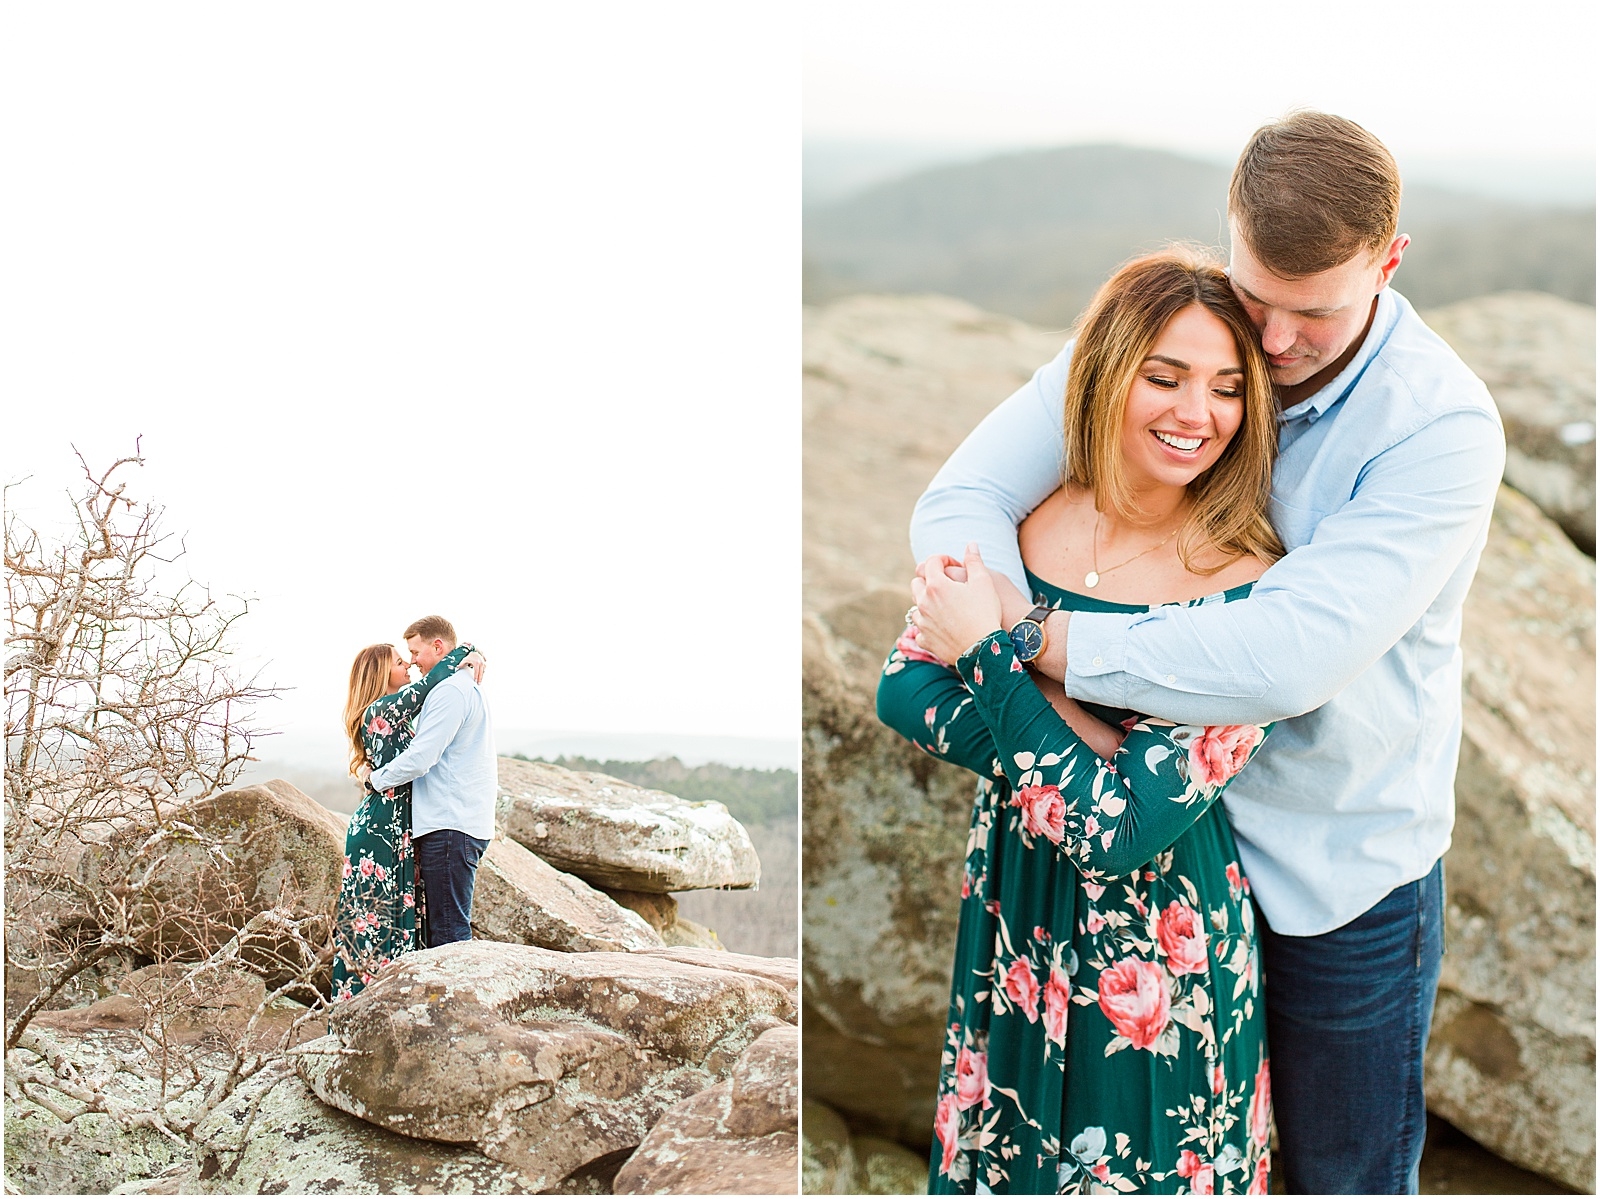 A Sunny Garden of the Gods Engagement Session | Shiloh and Lee | Bret and Brandie Photography094.jpg